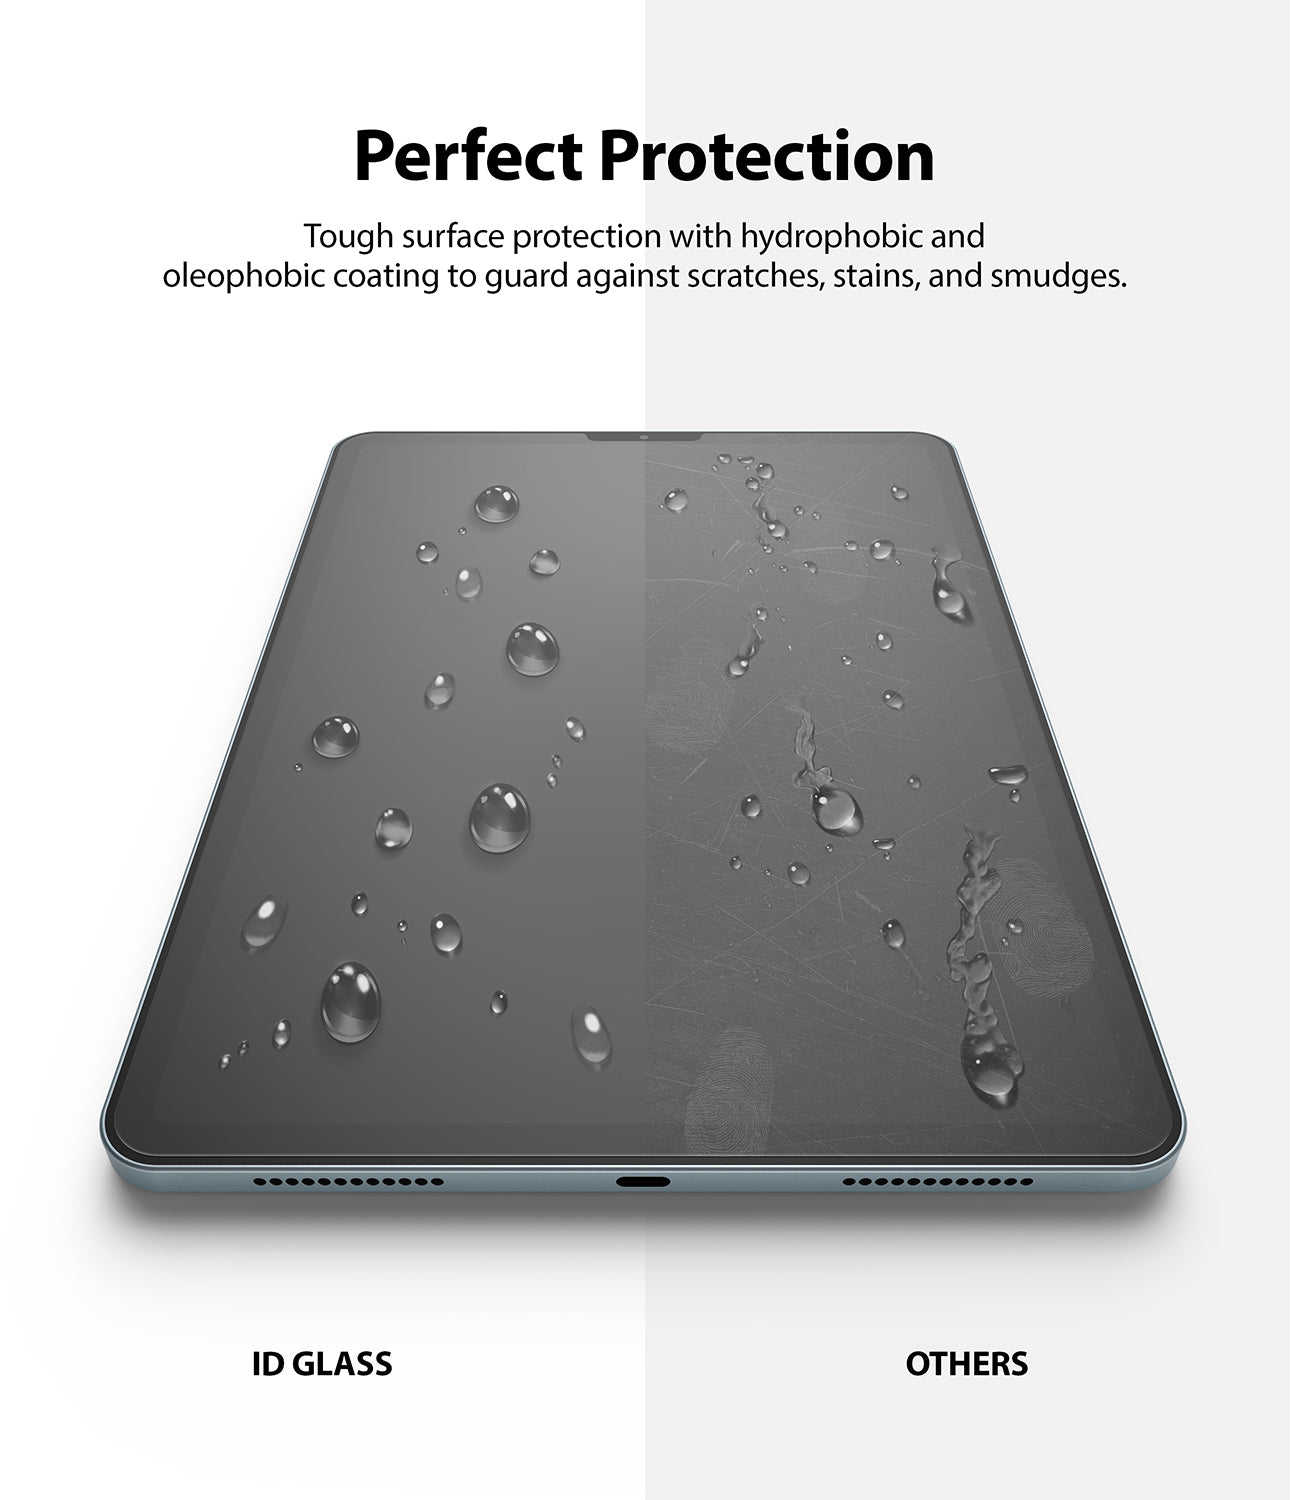 perfect protection - tough surface protection with hydrophobic, oleophobic coating